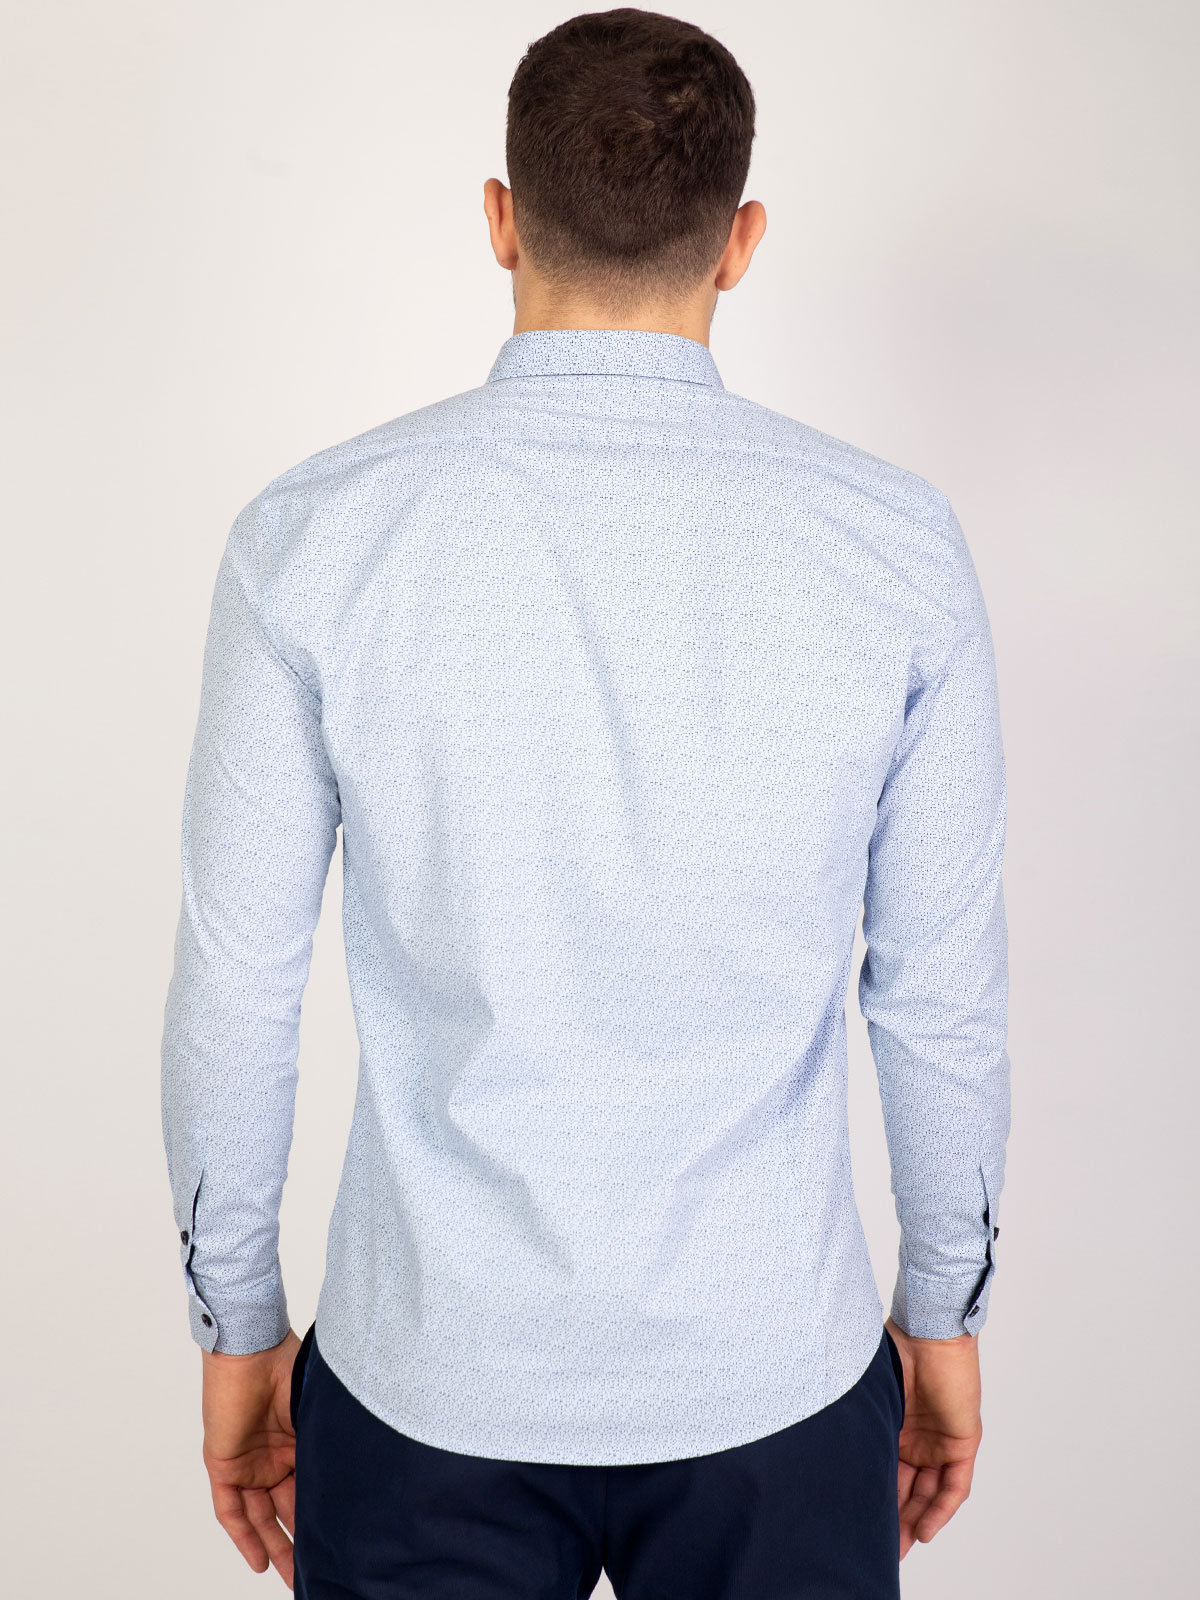  light blue shirt with small dots  - 21483 € 34.90 img2